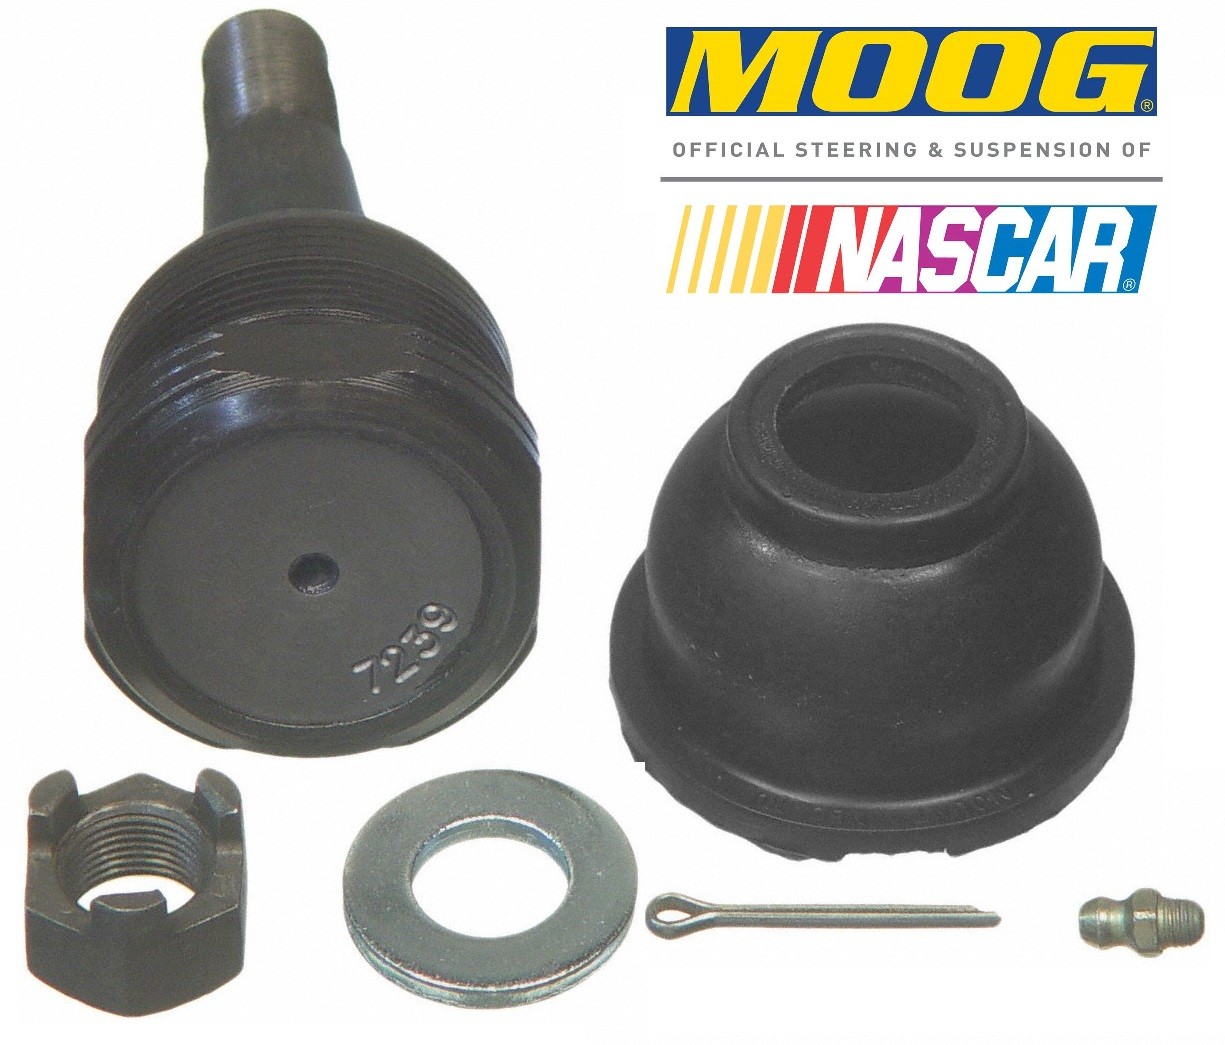 Lower Ball Joint : MOOG : Threaded : Suit 1960-66 Imperial